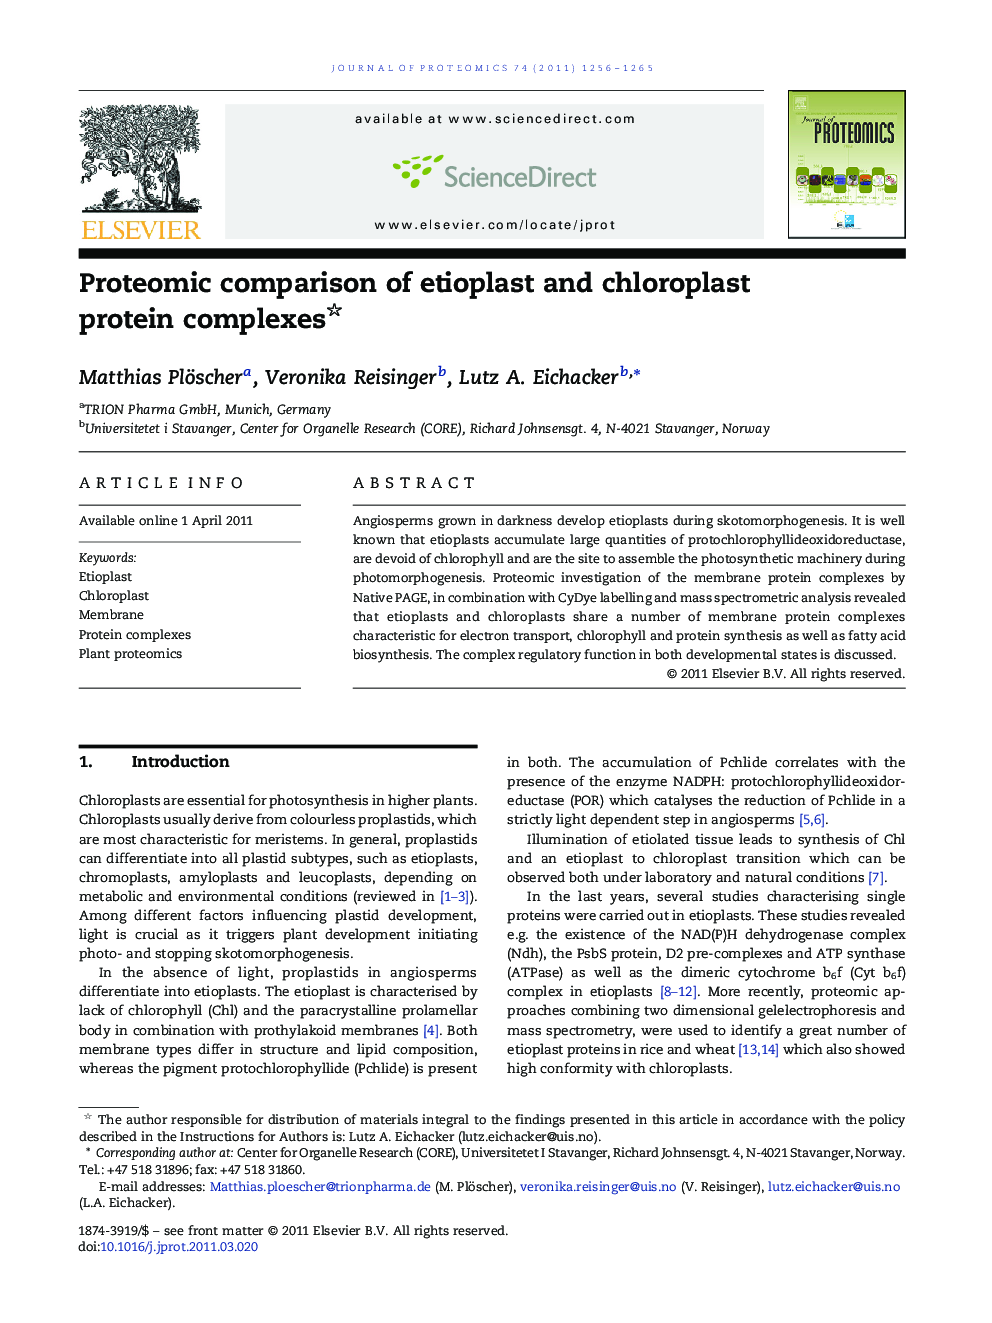 Proteomic comparison of etioplast and chloroplast protein complexes 